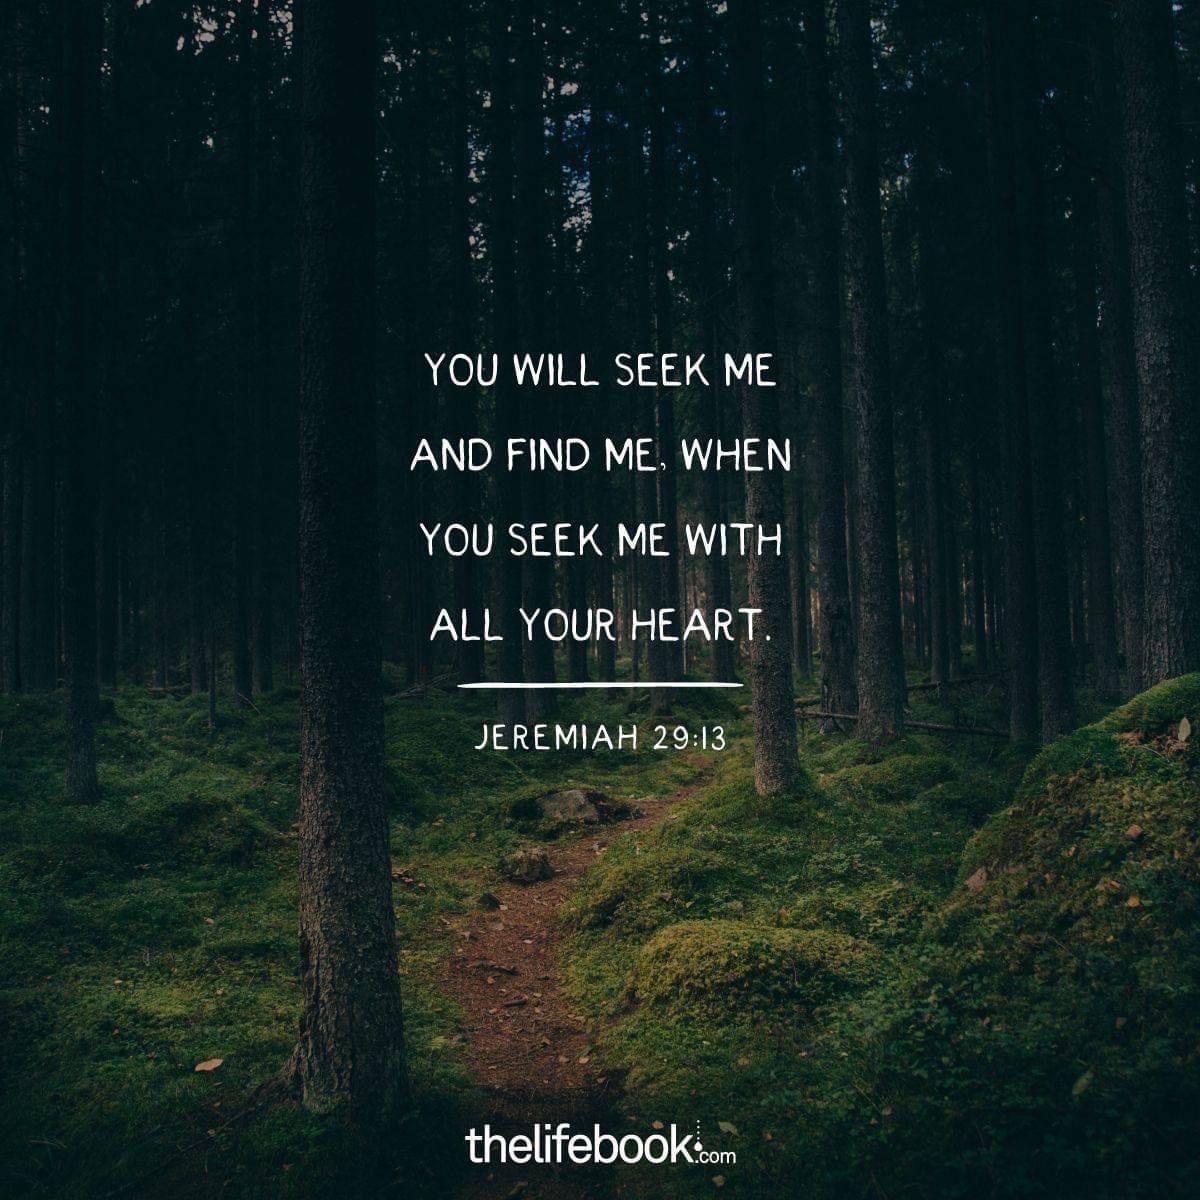 'YOU WILL SEEK ME AND FIND ME, WHEN YOU SEEK ΜΕ WITH ALL YOUR AL HEART. JEREMIAH 29:13 thelifebook.com'